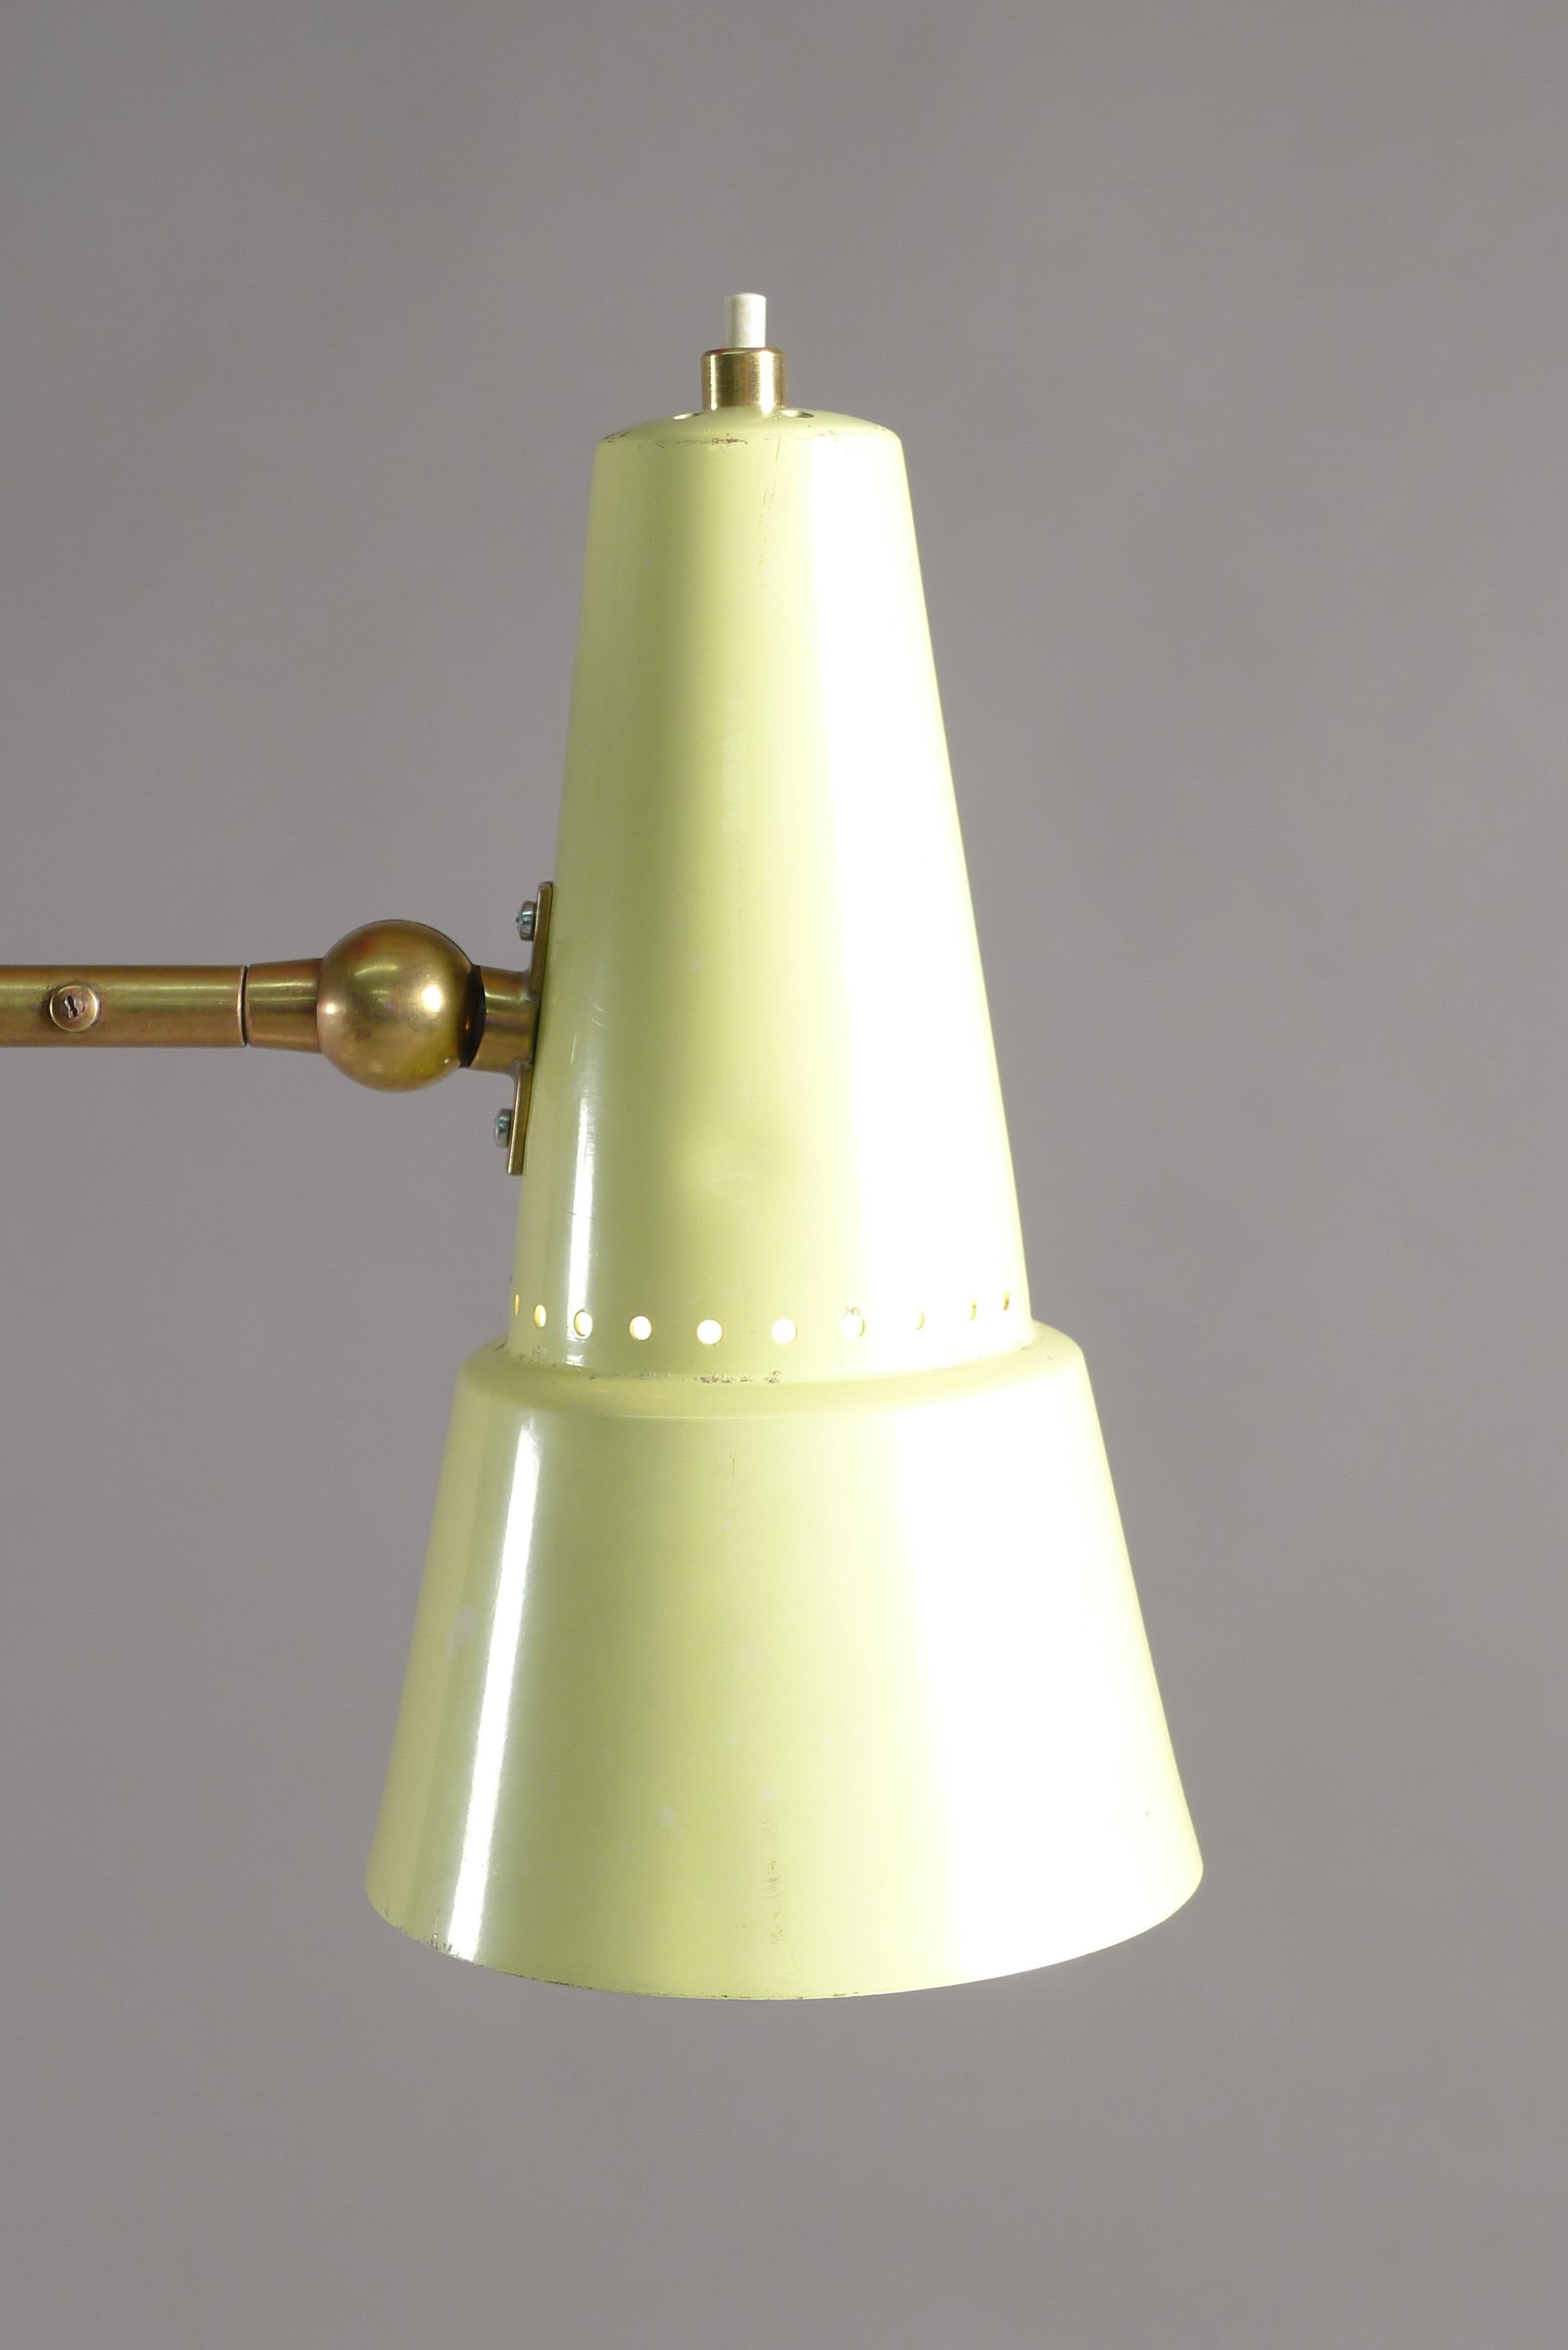 Stilnovo, Italy, circa 1955. A floor lamp with marble foot supporting an angled upright stem with large red uplighter on top and a pivoting brass arm terminating in a yellow enamelled shade which pivots in all directions.
The stem is angled near